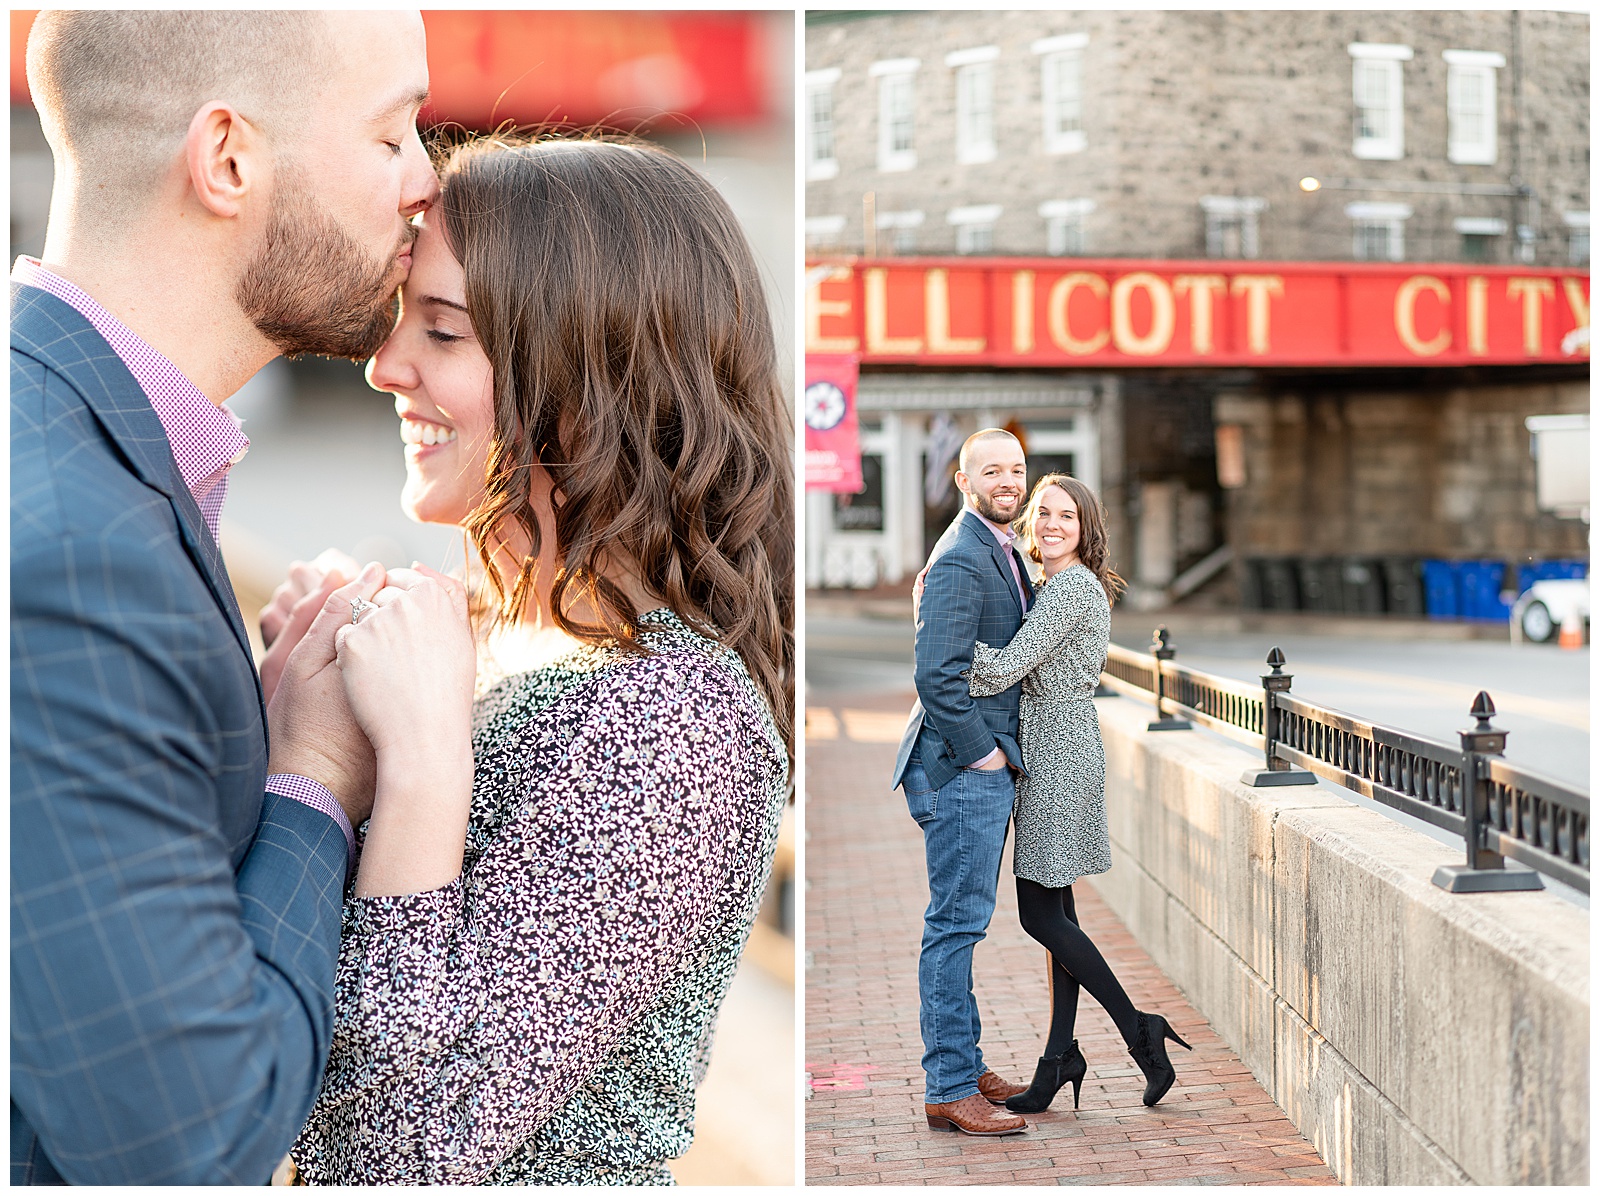 couple's engagement photos in front of famous Eillicott City sign